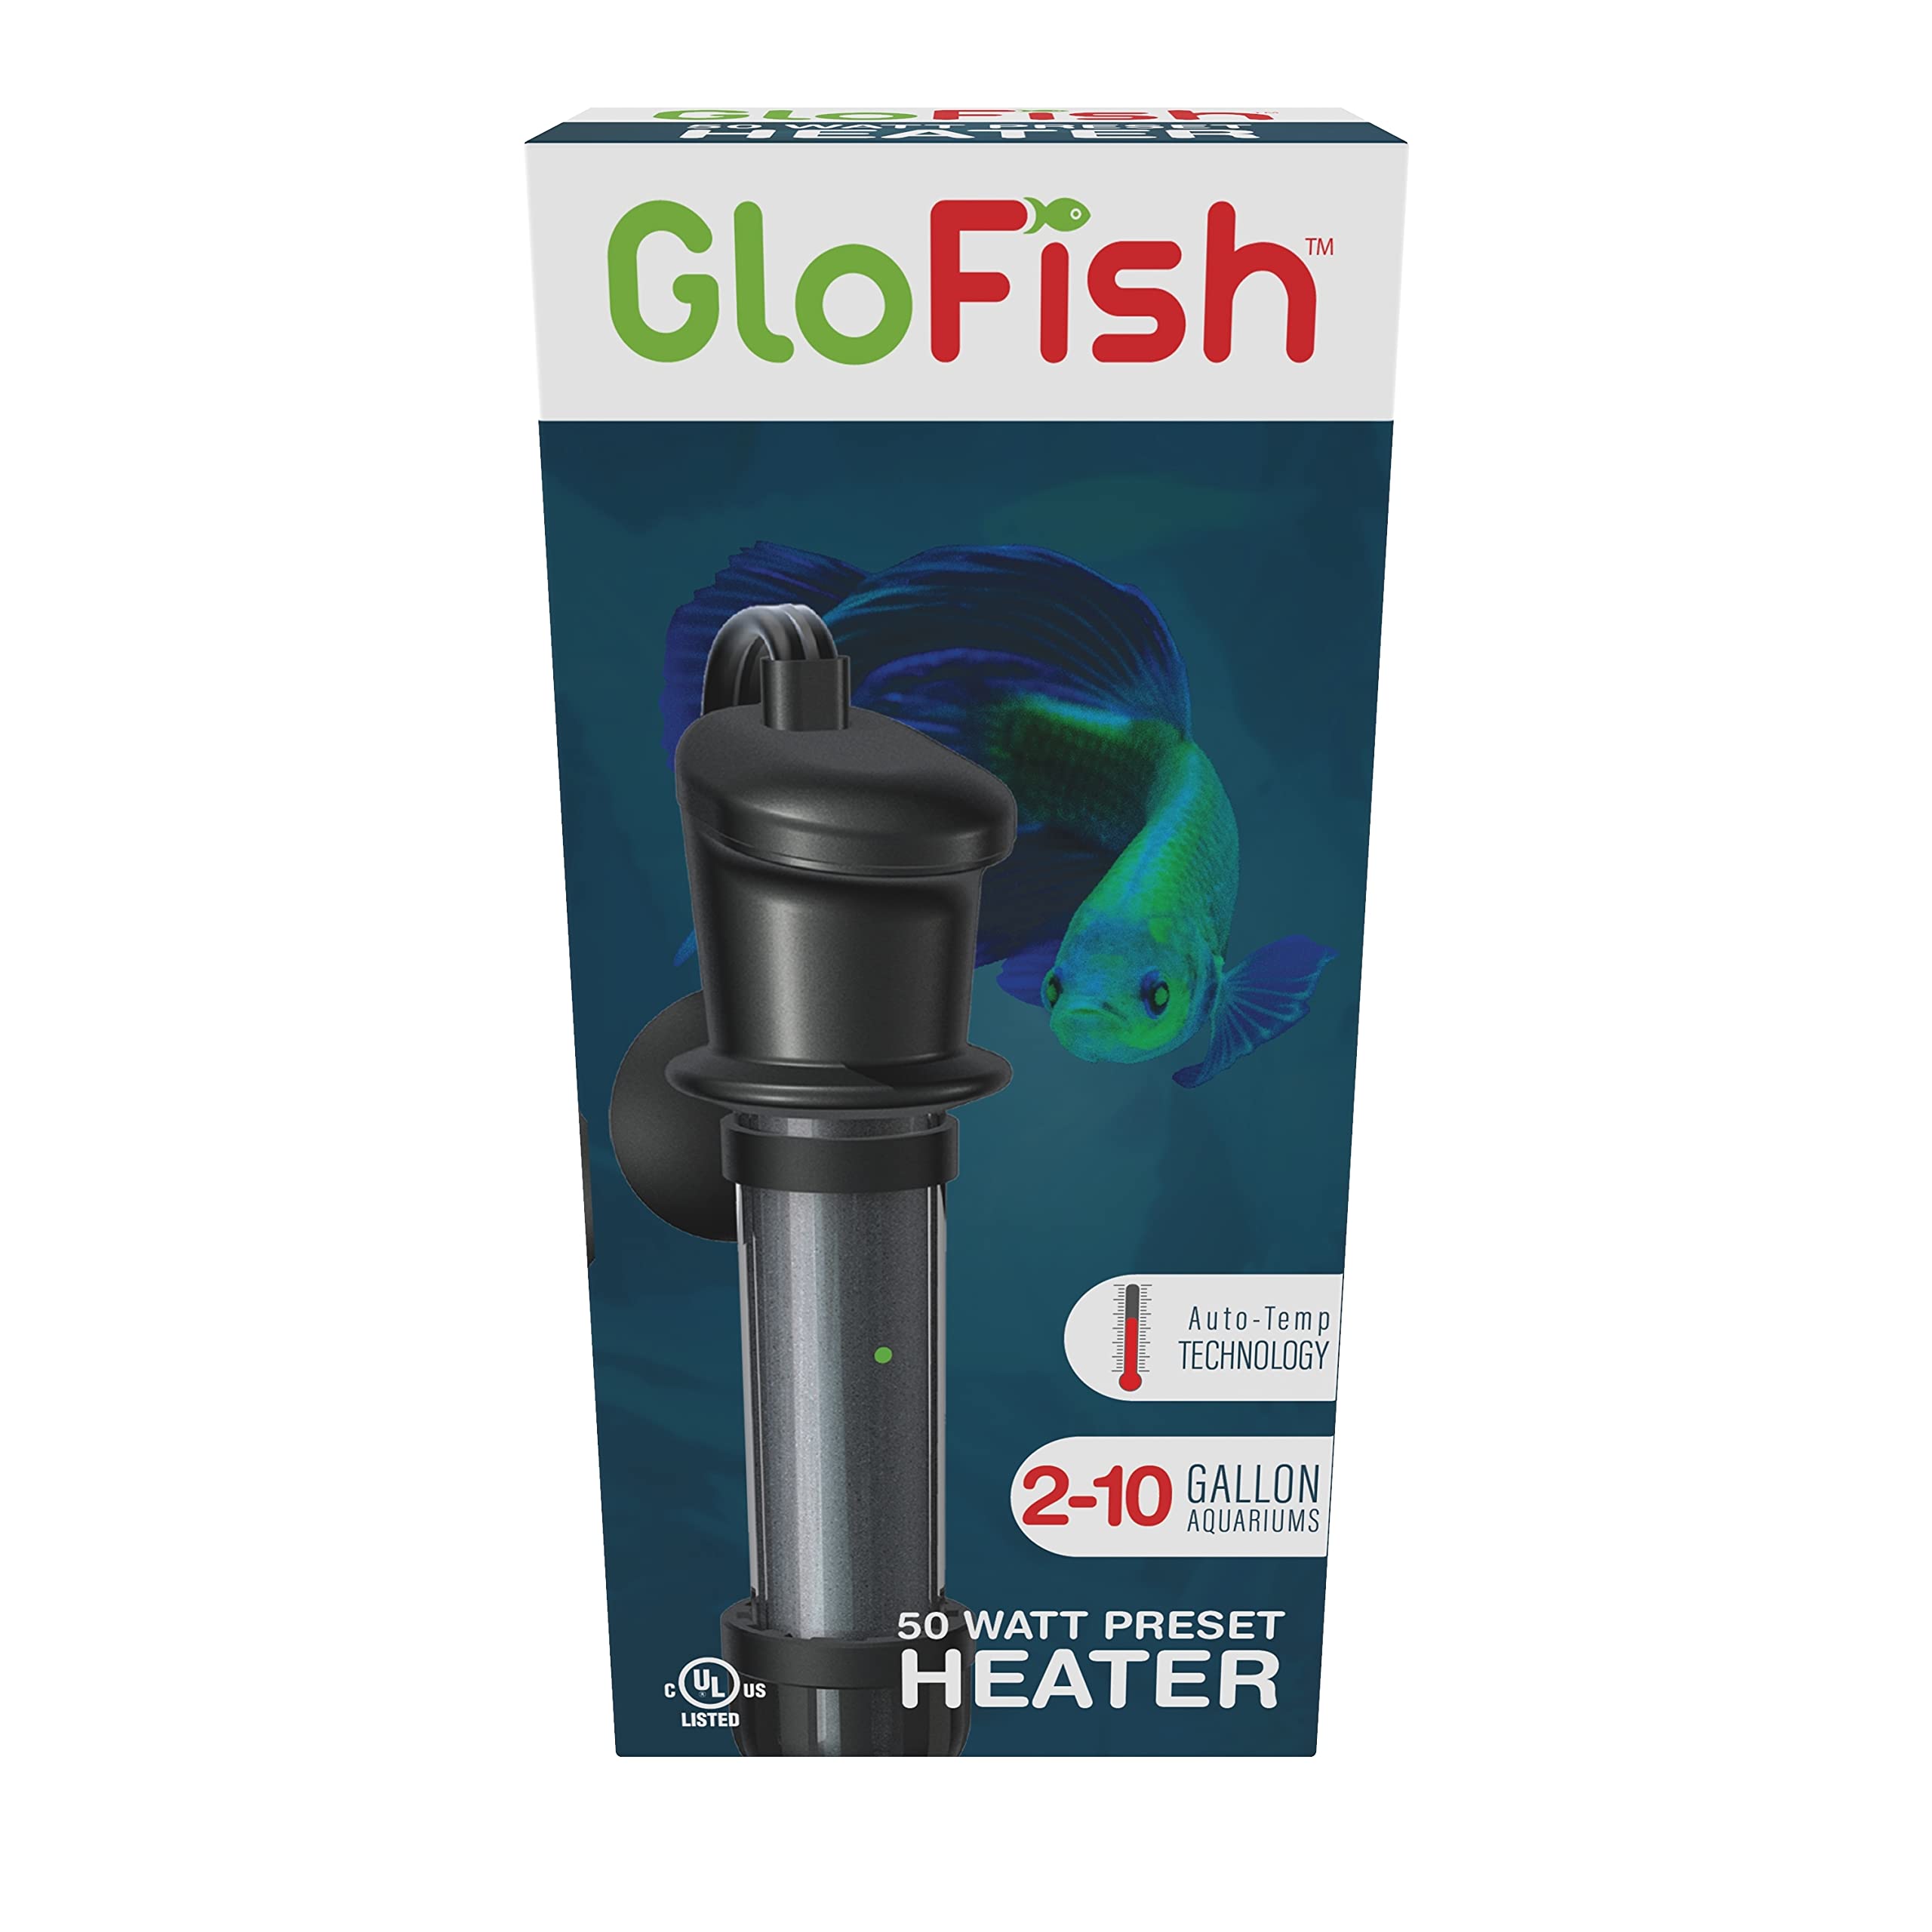 GloFish 50W Submersible Heater for Aquariums Up to 10 Gallons, UL Listed, BLACK.